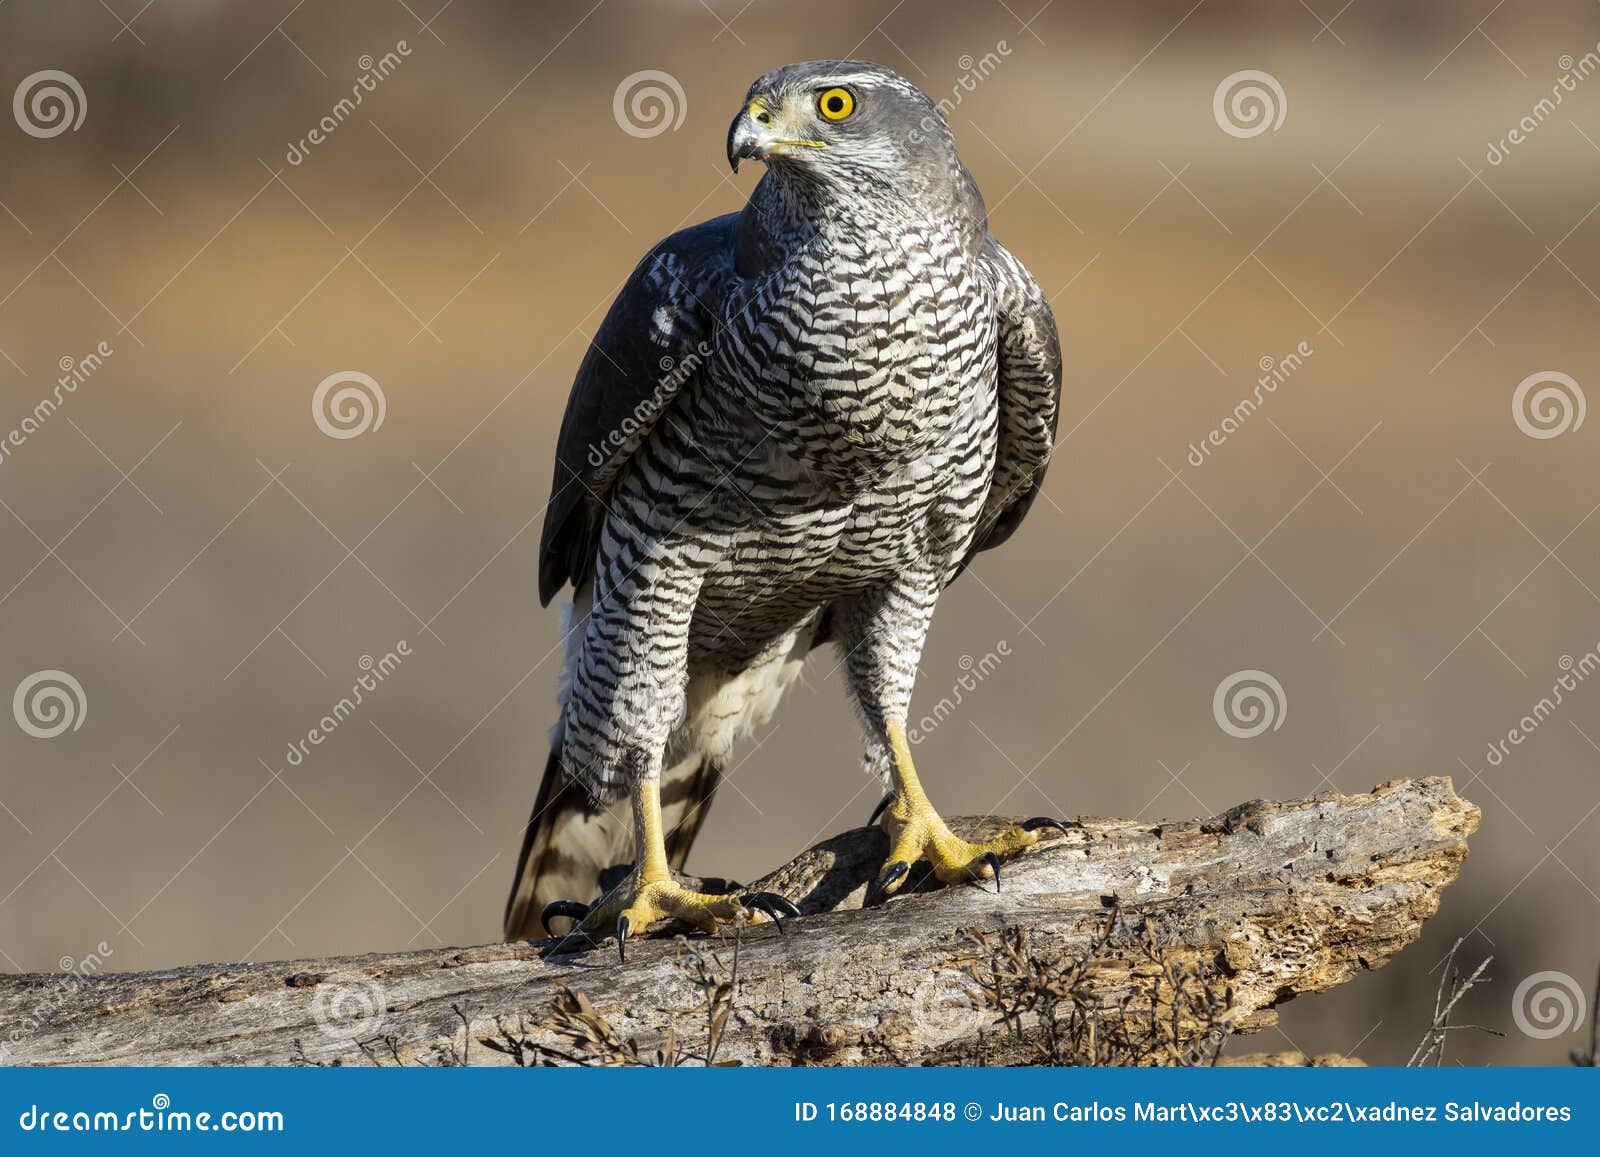 adult wild azor, accipiter gentilis, perched on its usual perch